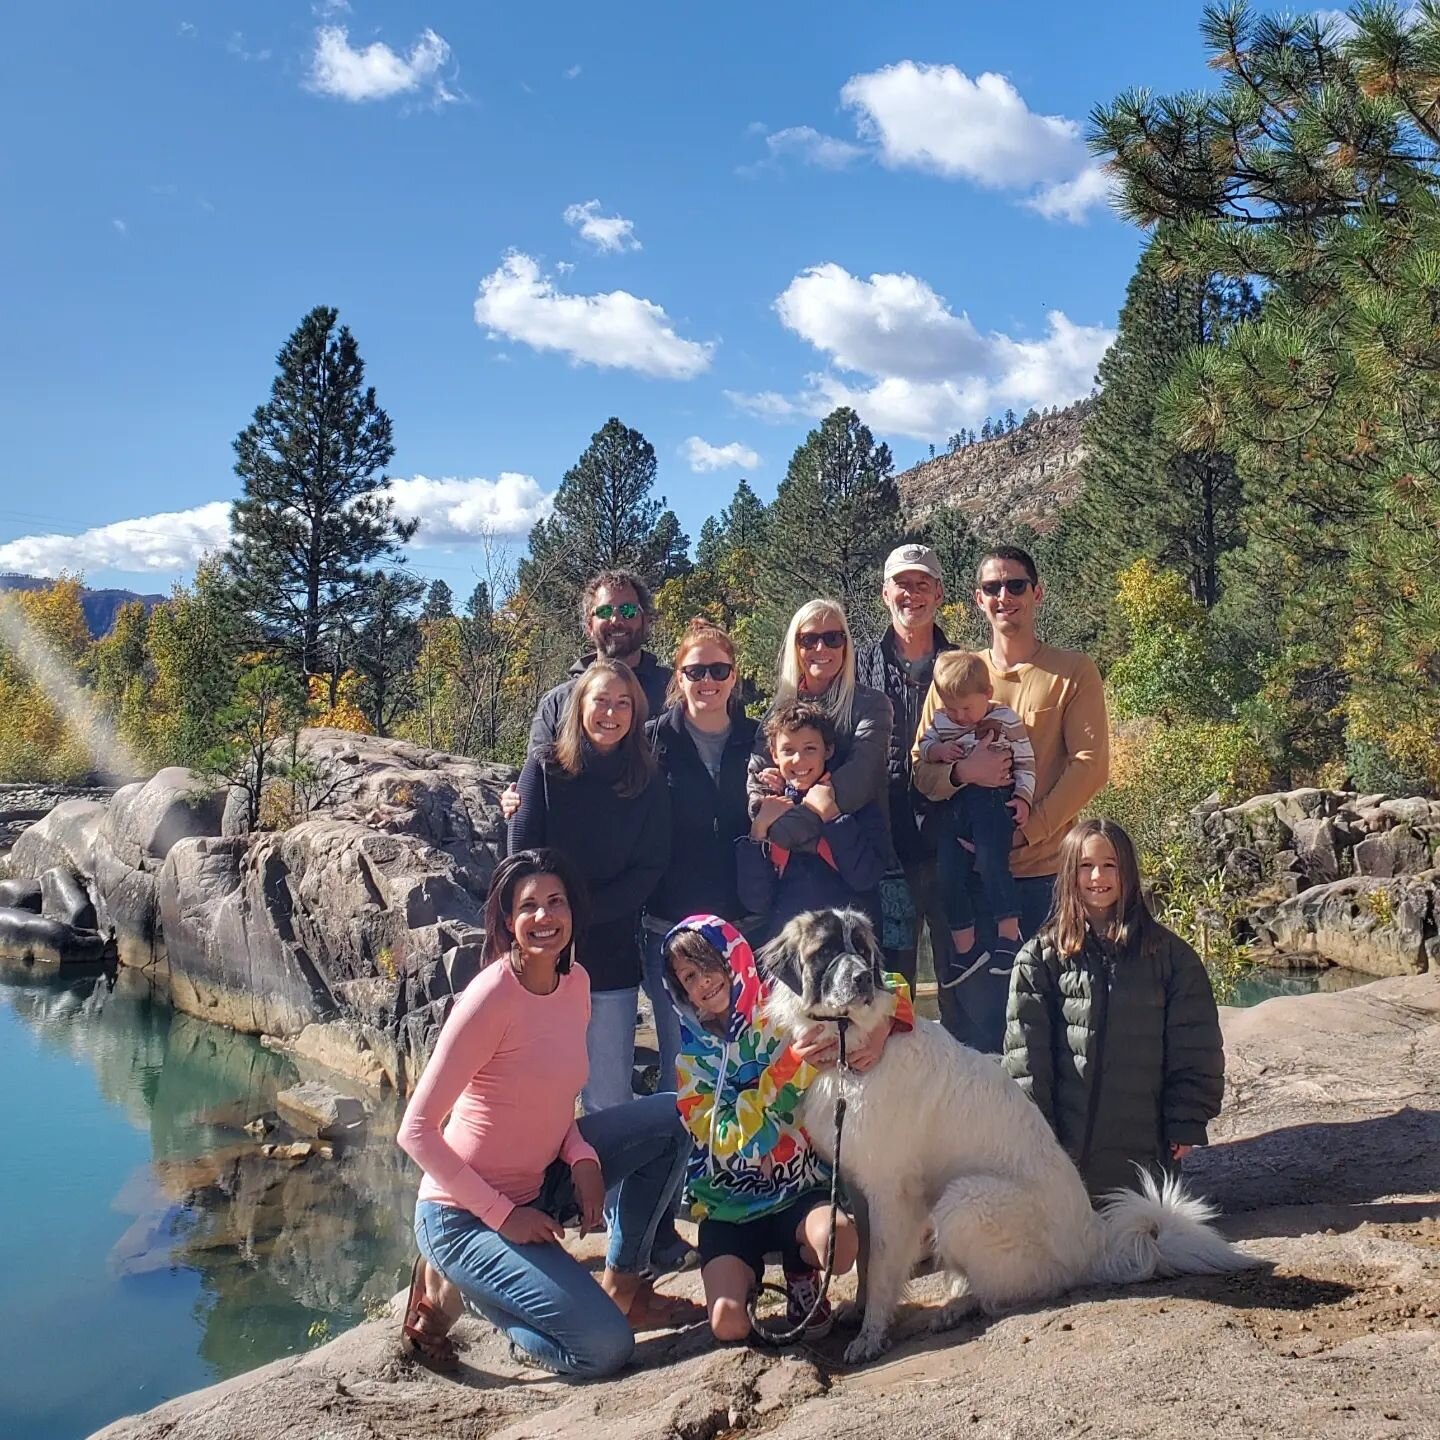 Family does Durango! 🍁 We stayed busy for 8 days straight seeing all the colorful leaves and vistas, we surfed nighthorse in wetsuits, rode the Telluride gondola with excitement, fished rivers and streams with grandpa, soaked in hot springs until we